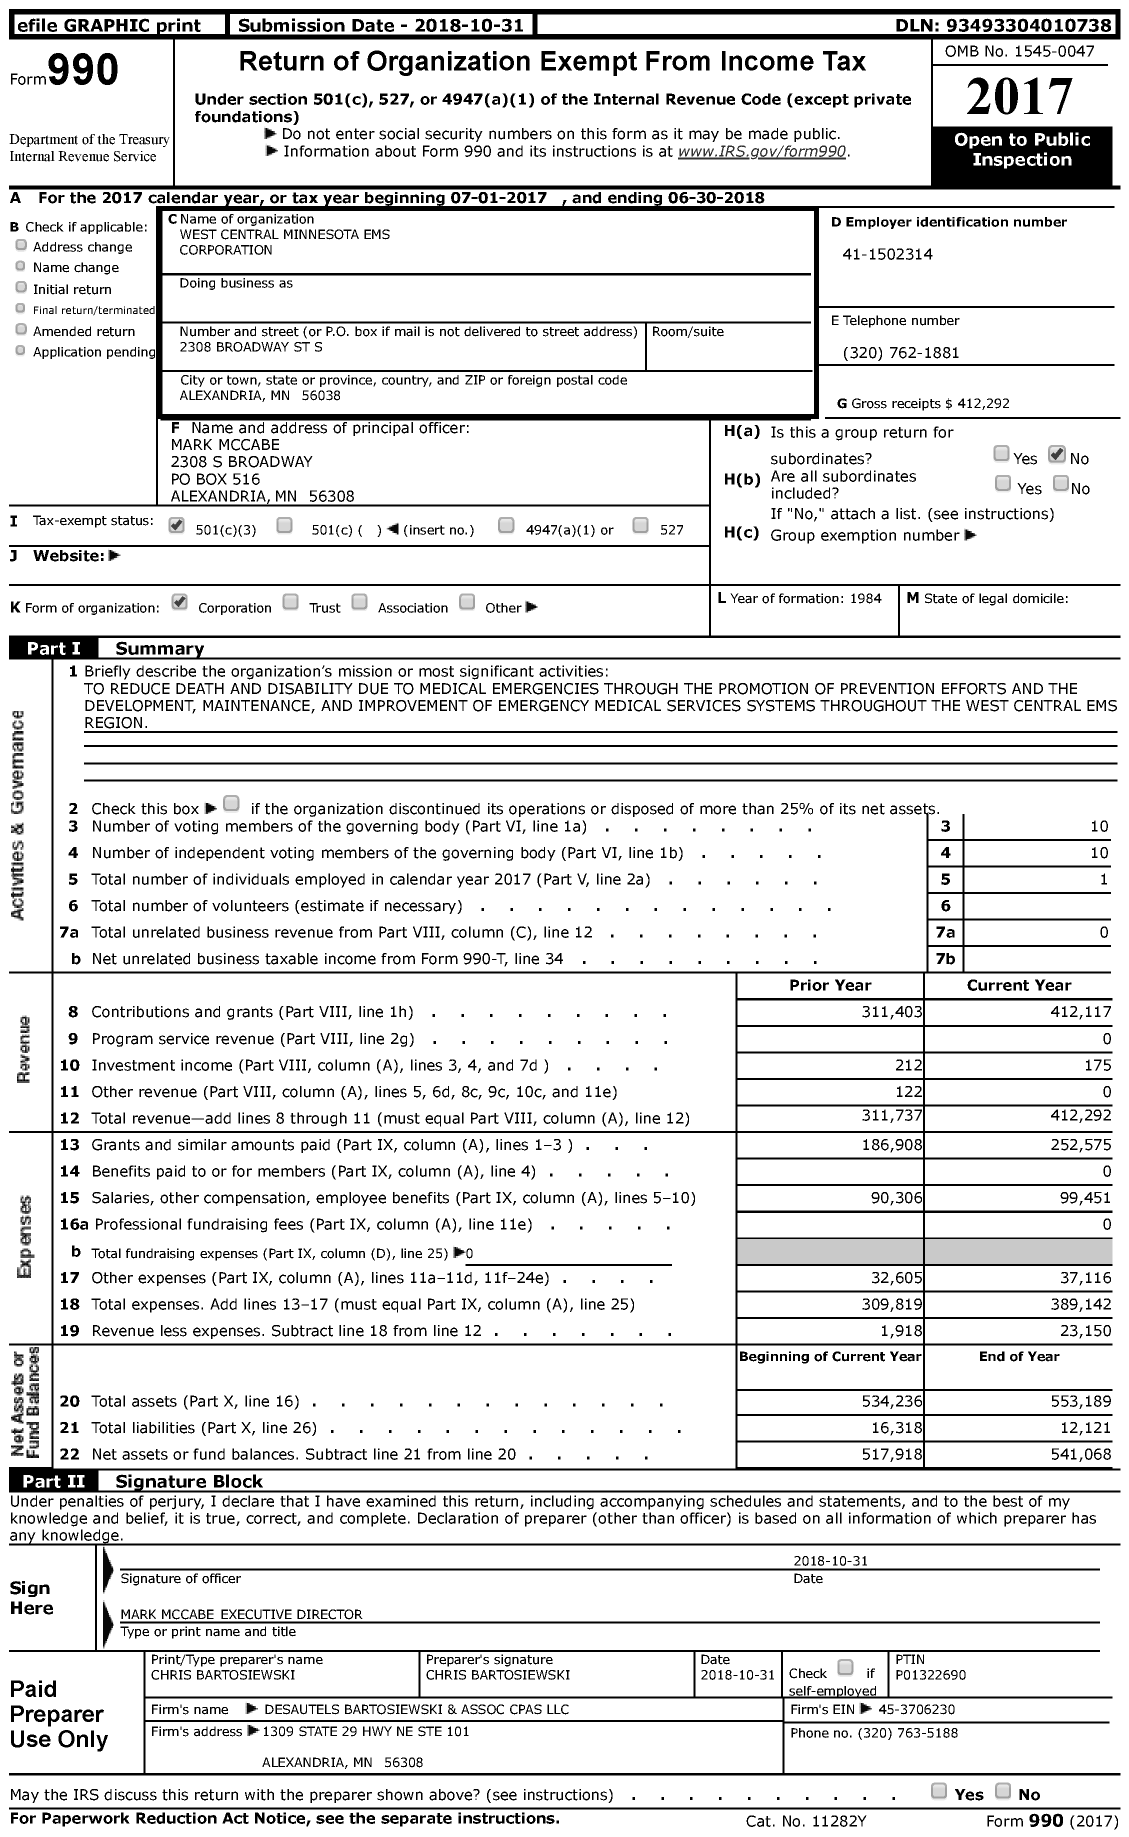 Image of first page of 2017 Form 990 for West Central Minnesota Ems Corporation